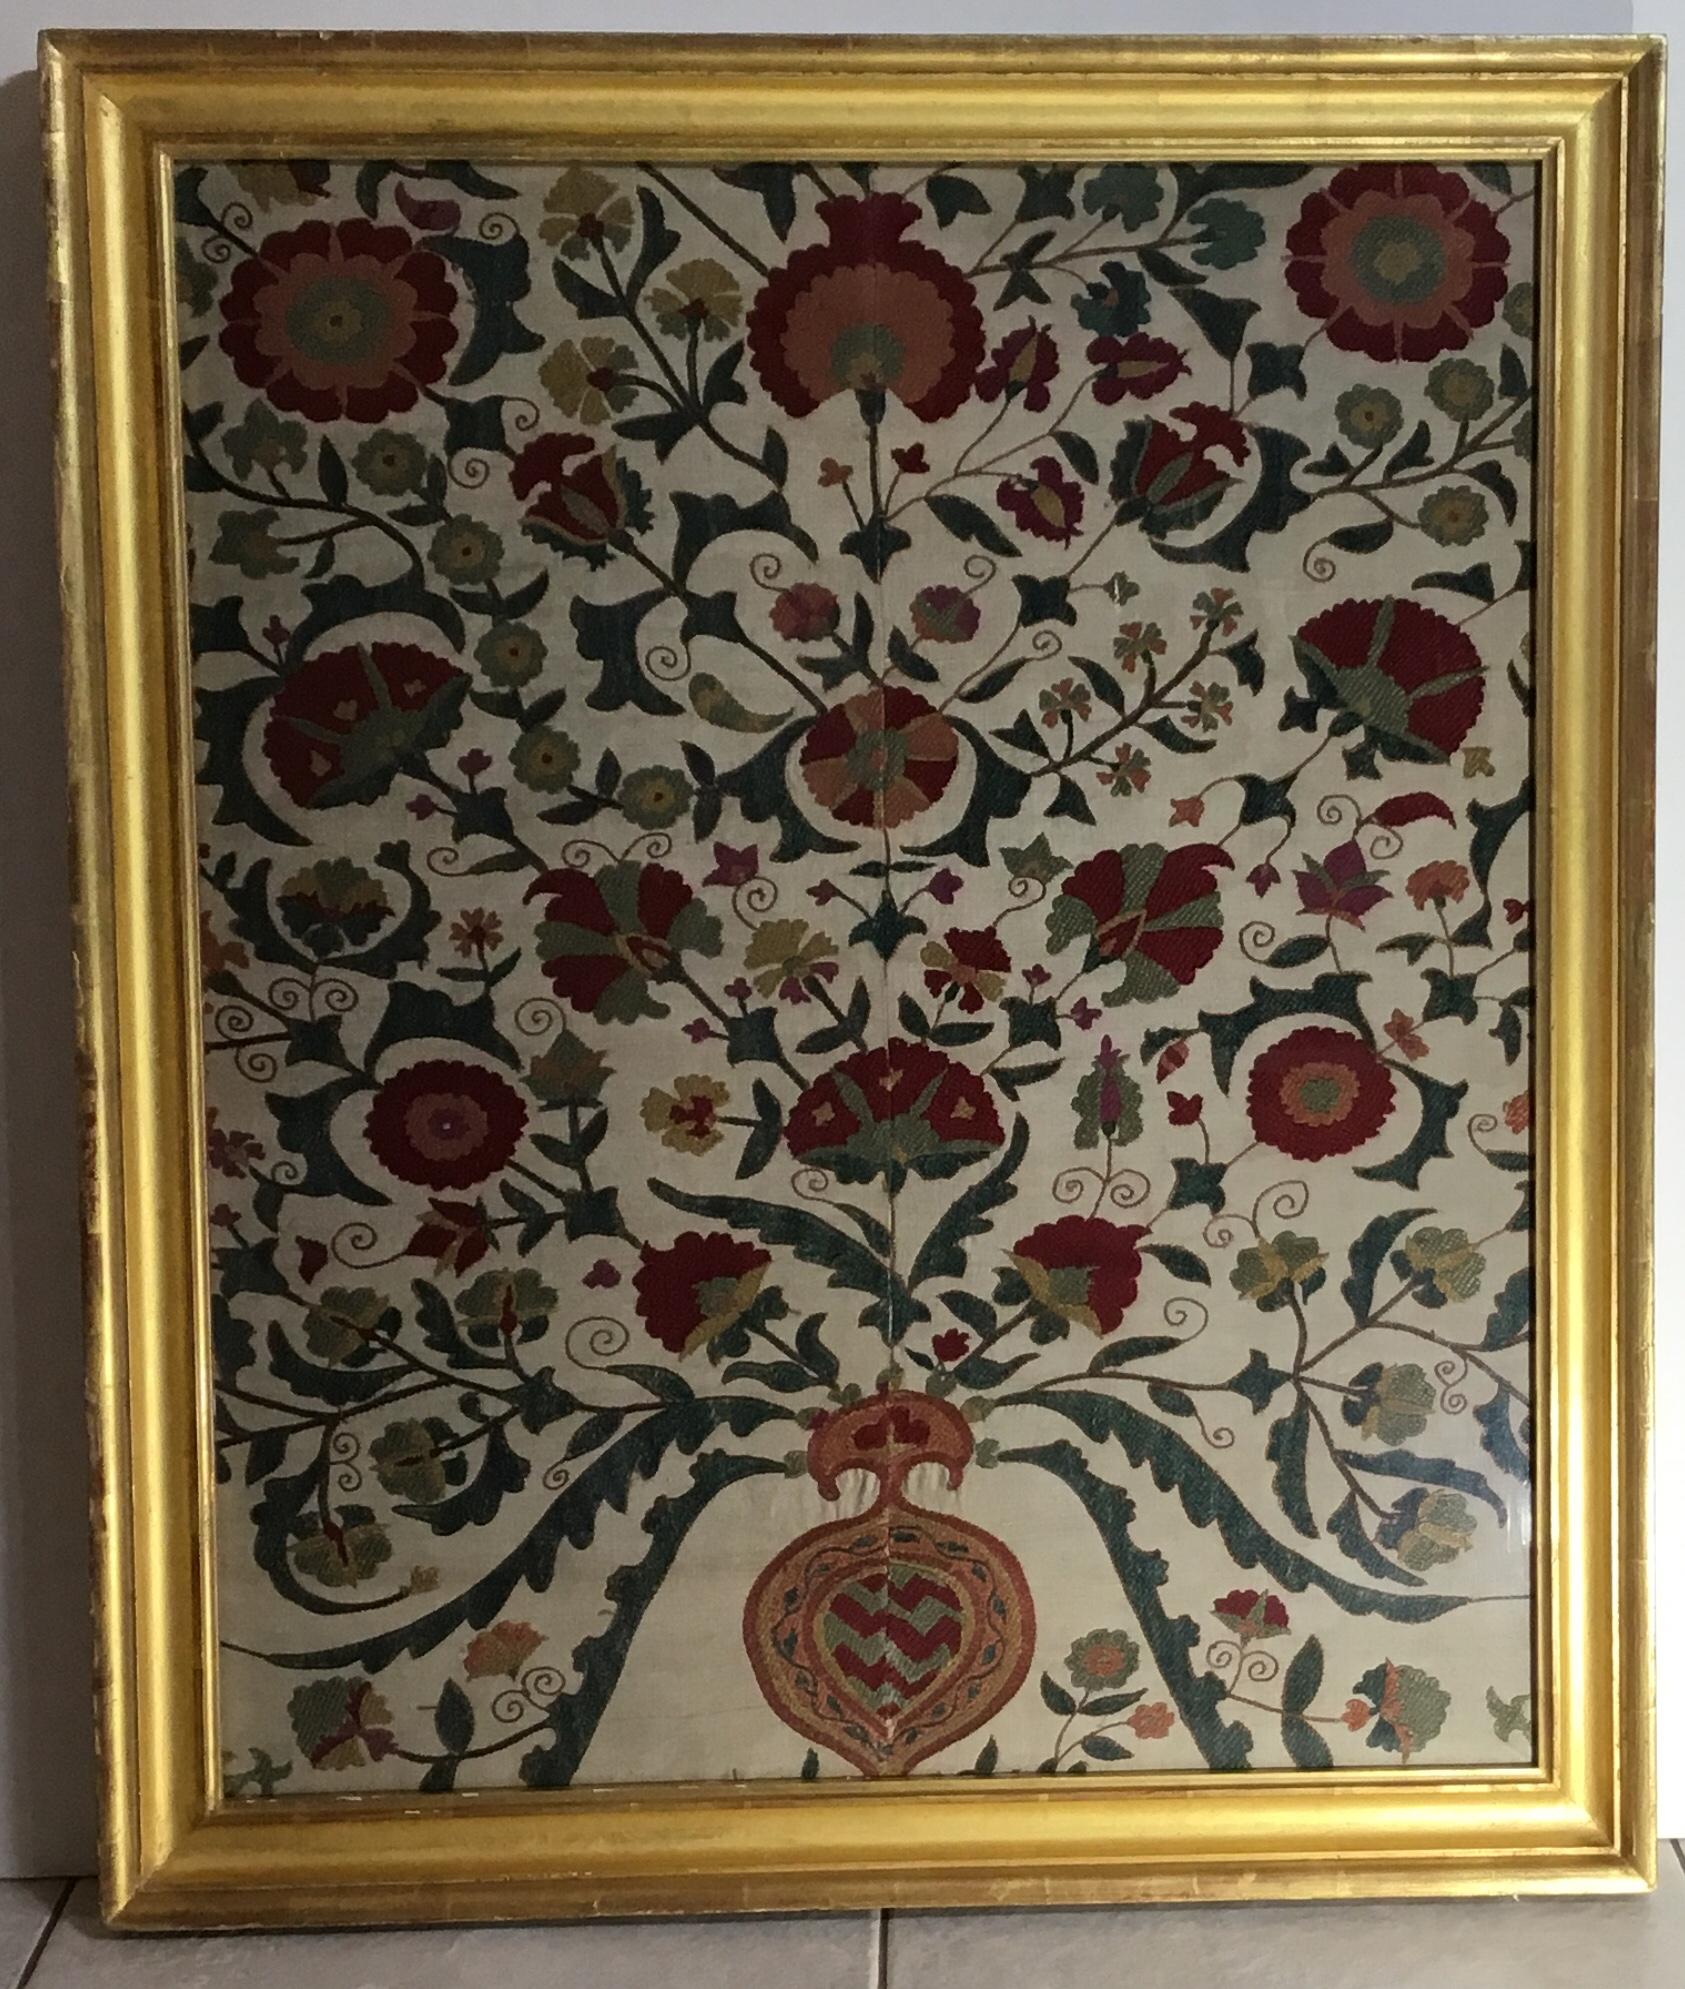 Exceptional hand embroidery suzani textile, professionally framed in antique gold leaf wood frame and protected with glass. Beautiful colorful motifs of vine and flowers make this wall hanging great decorative object of art to hang in any room.